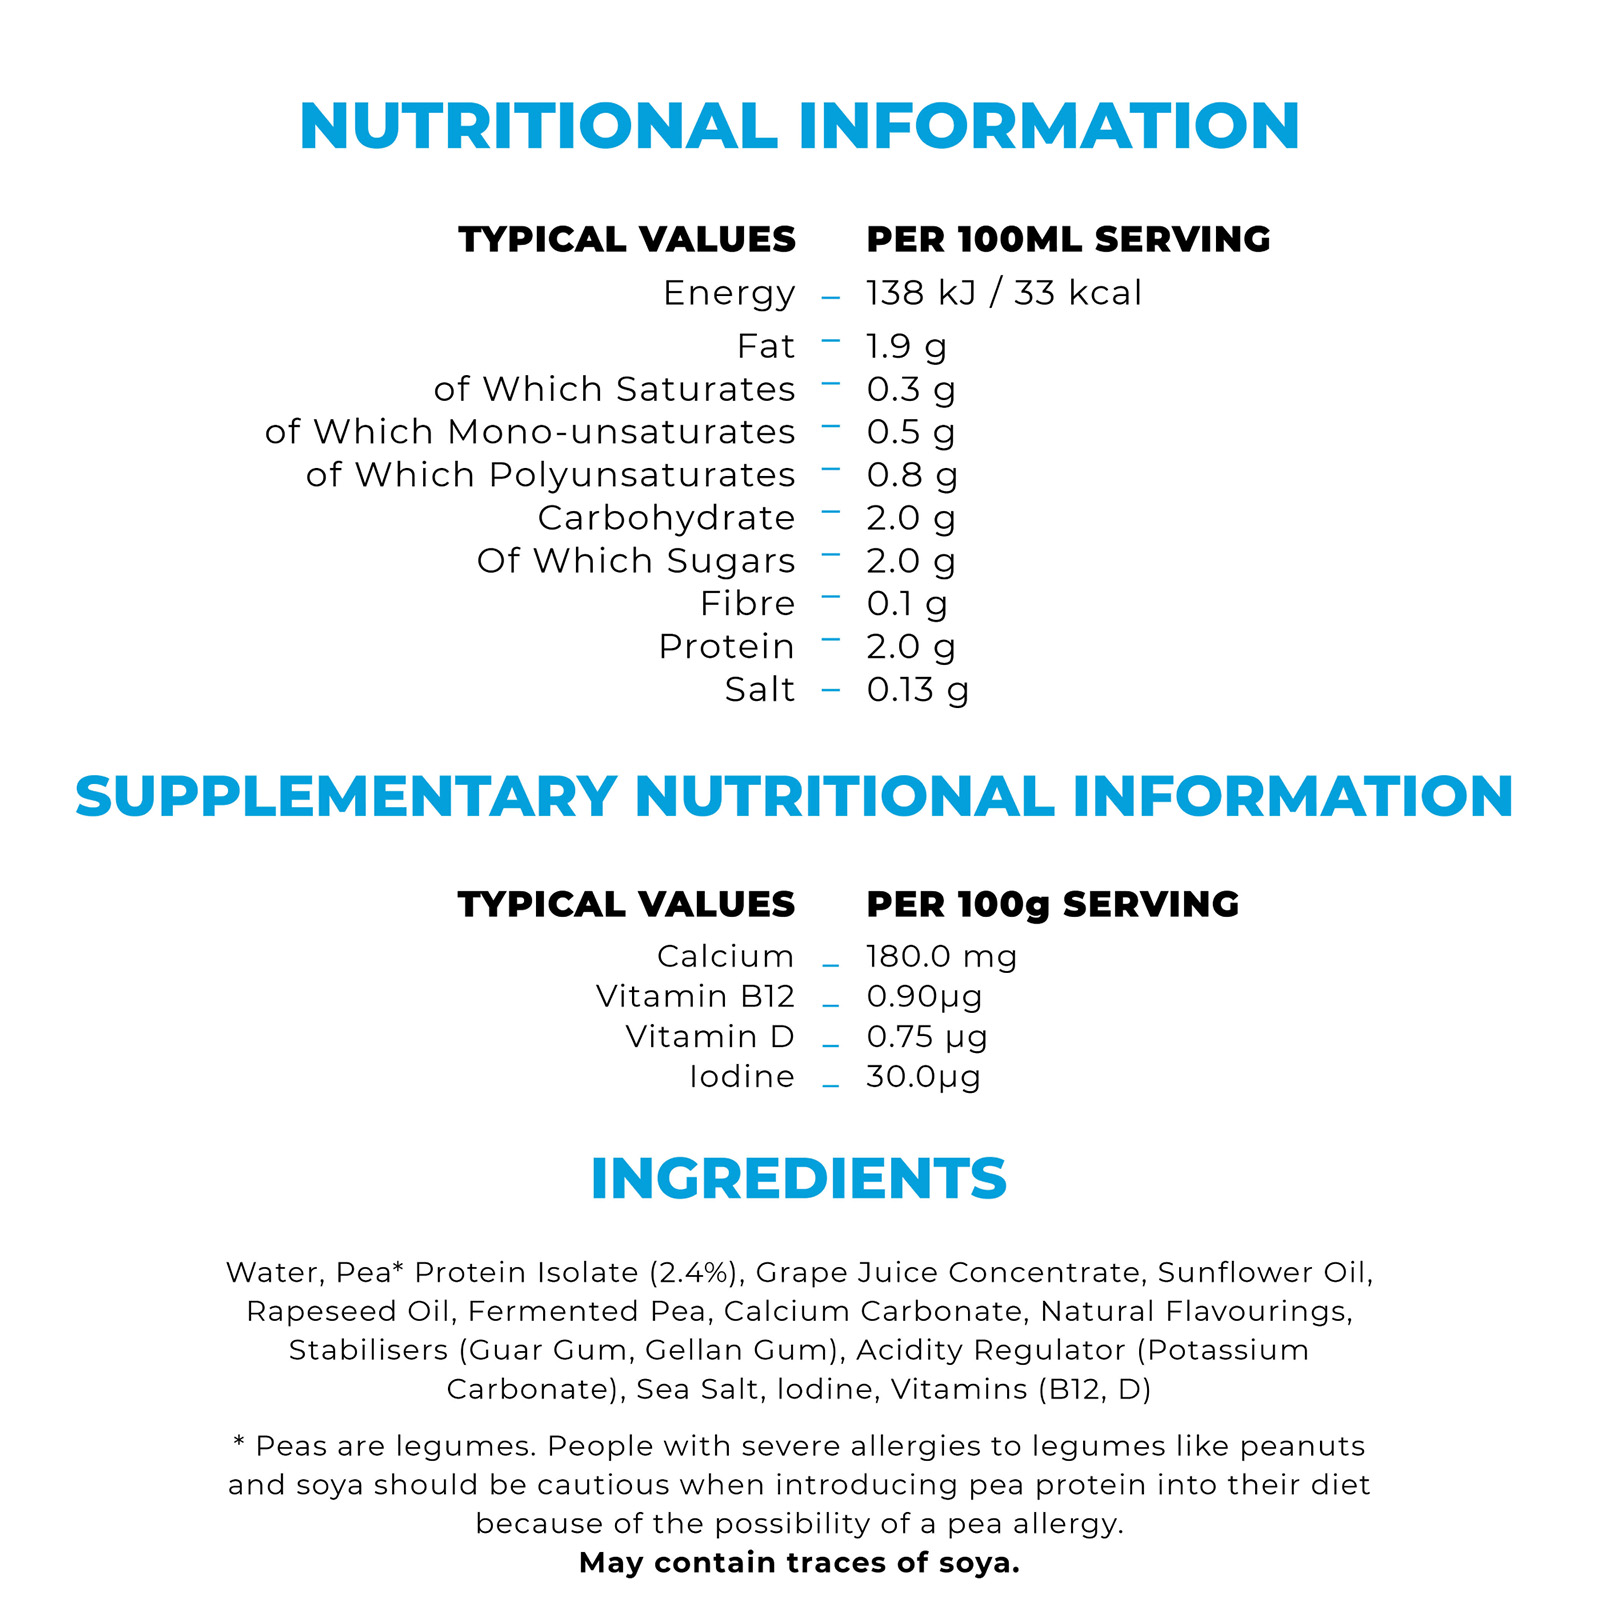 

                          TYPICAL VALUES PER 100ML SERVING Energy 144 kJ / 35 kcal Fat 1.9 g of Which Saturates 0.3 g of Which Mono-unsaturates 0.5 g of Which Polyunsaturates 0.8 g Carbohydrate 2.0 g of Which Sugars 2.0 g Fibre 0.1 g Protein 2.4 g Salt 0.20 g 
                          CUPPLEMENTARY NUTRITIONAL INFORMATION 
                          TYPICAL VALUES PER 100g SERVING Calcium _ 186.0 mg Vitamin B12 _ 0.94 pg Vitamin D _ 0.78 pg Iodine _ 31.0 pg 

                          Water, Pea Protein Isolate (3%), Grape Juice Concentrate, Sunflower Oil, Calcium Carbonate, Natural Flavourings, Stabilisers (Guar Gum, Gellan Gum), Acidity Regulator (Potassium Carbonate), Sea Salt, Iodine, Vitamins (B12, D) 

                          